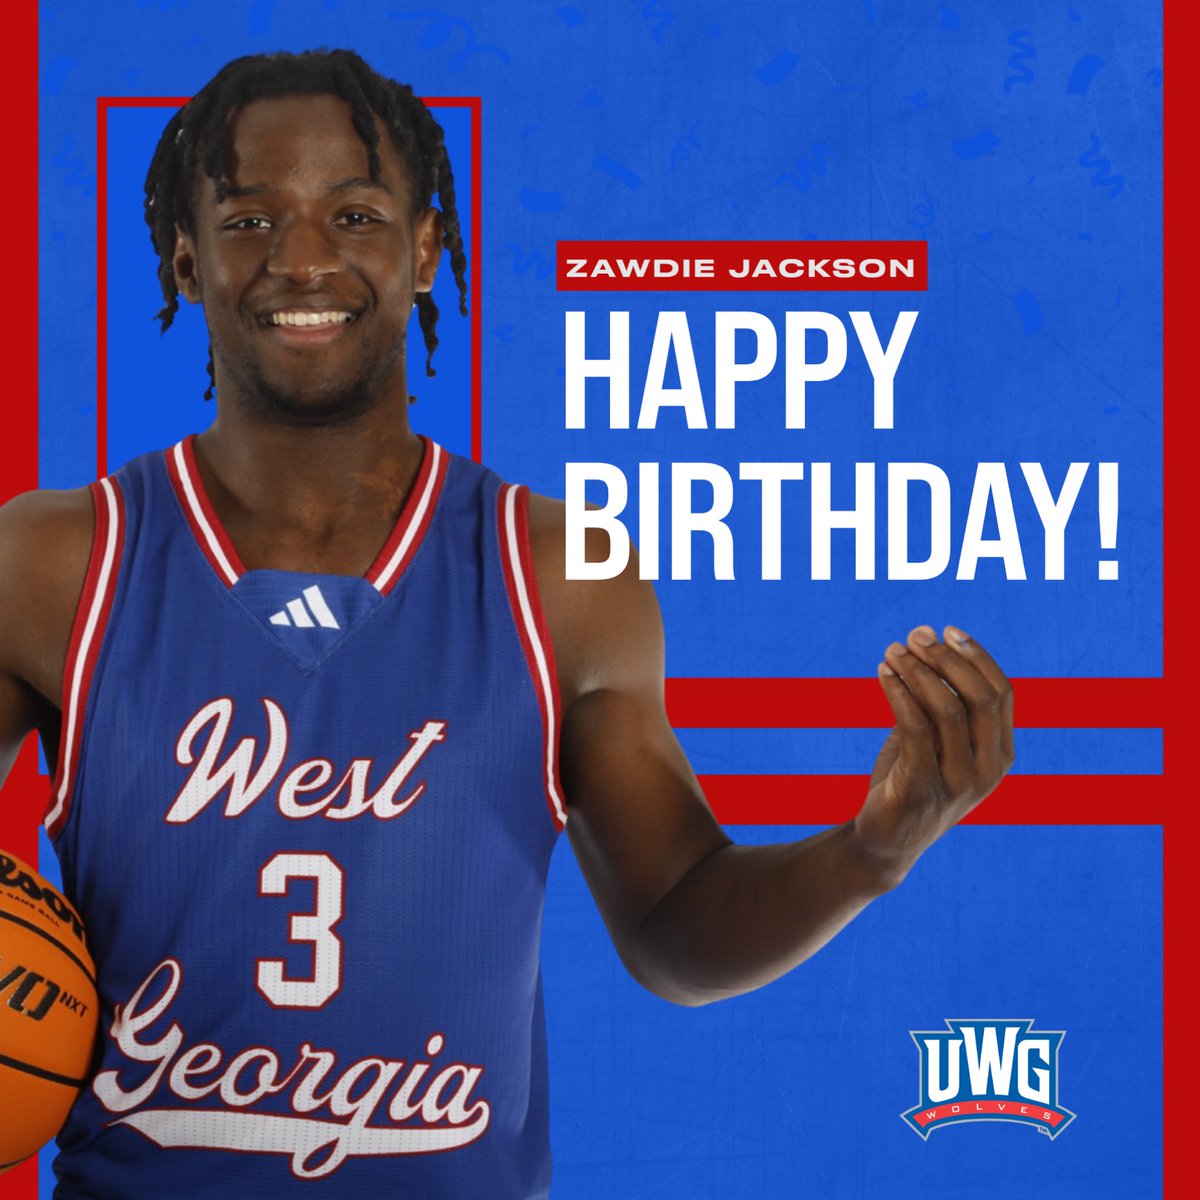 Everybody join us in wishing our guy Zawdie a happy birthday! 🐺🐺 #WeRunTogether